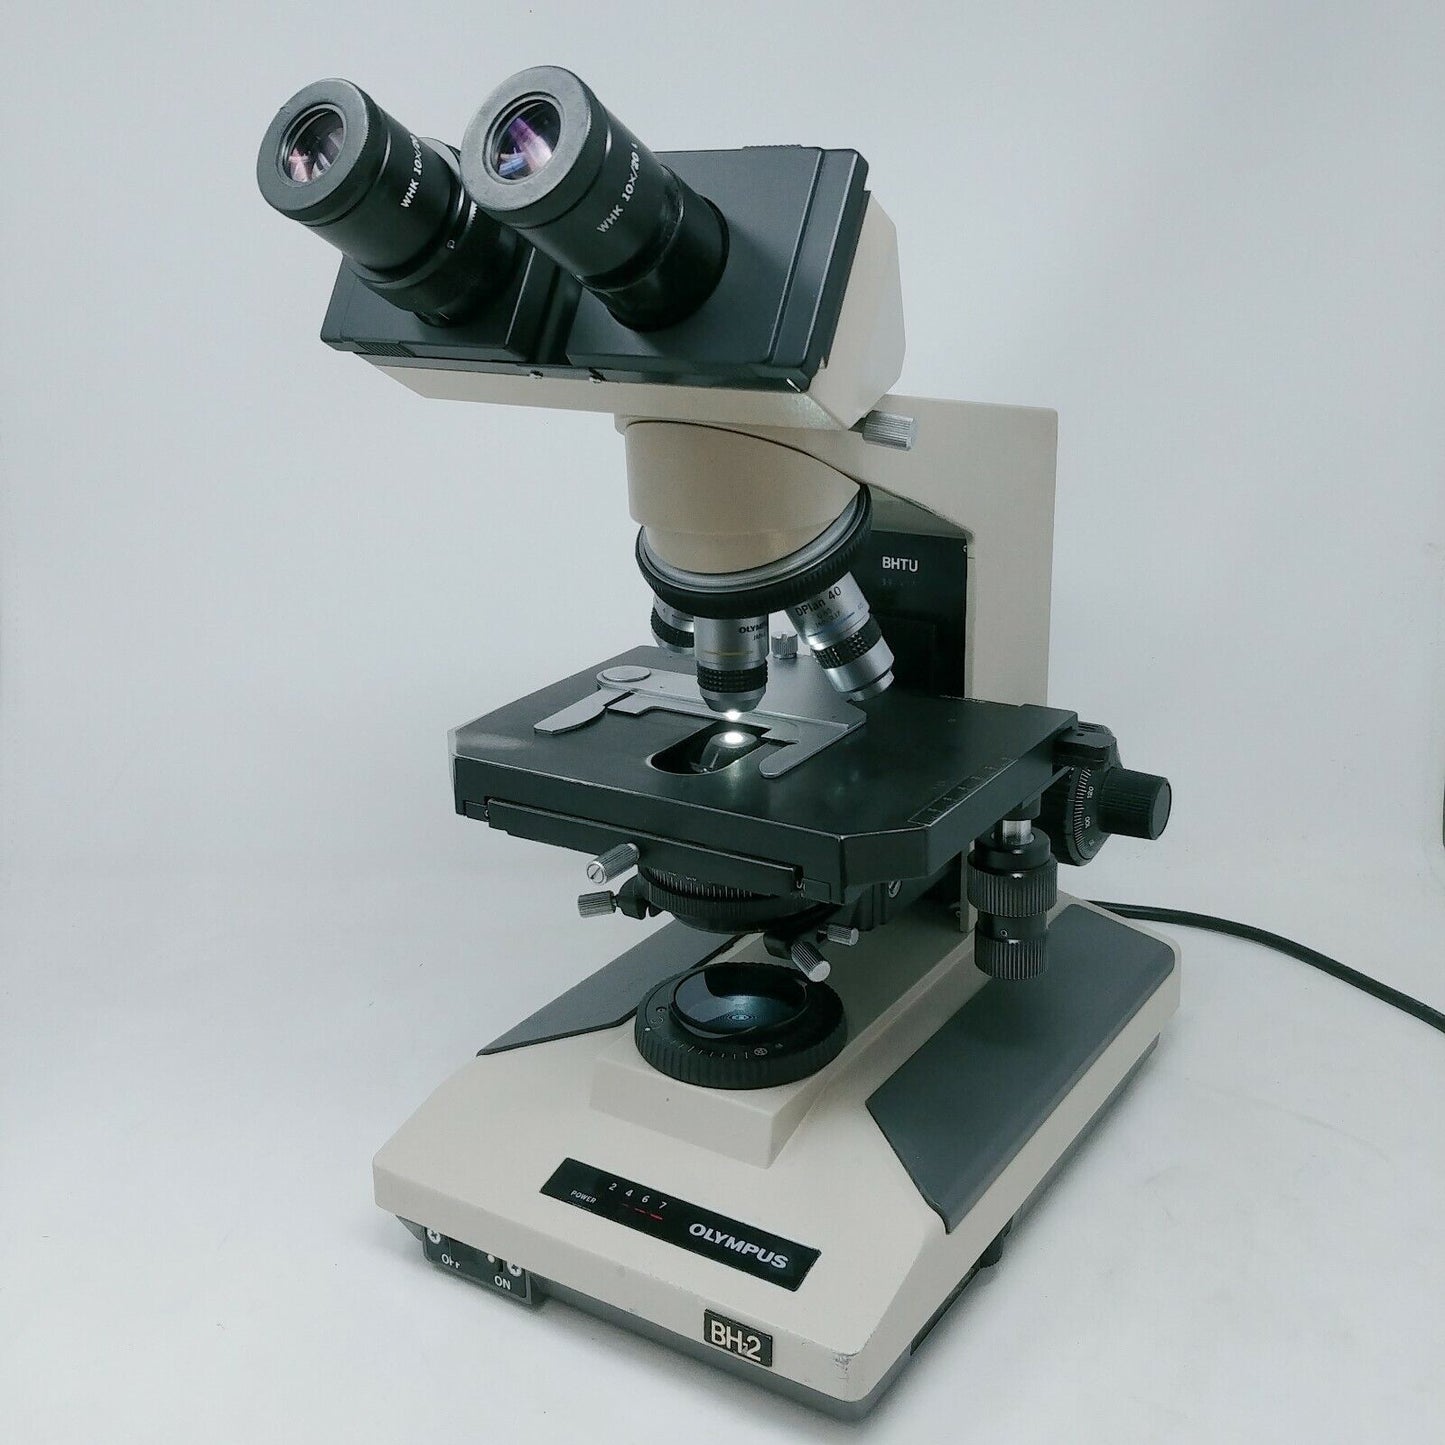 Olympus Microscopes Mohs Lab Package BX41 LED with U-TRUS Camera Port and BH2 - microscopemarketplace